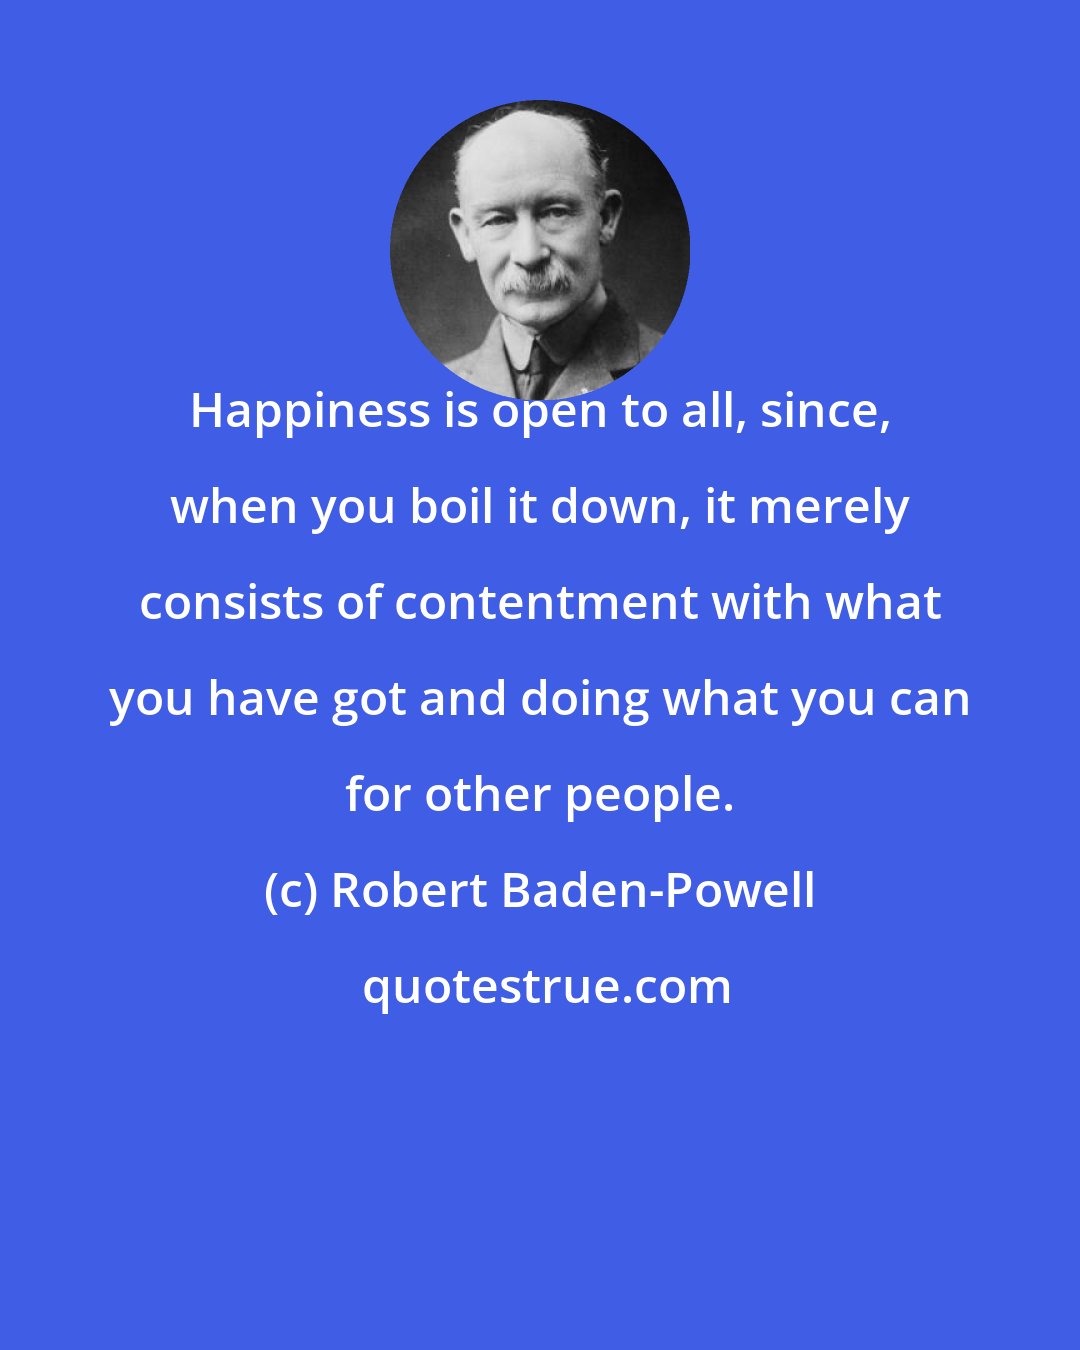 Robert Baden-Powell: Happiness is open to all, since, when you boil it down, it merely consists of contentment with what you have got and doing what you can for other people.